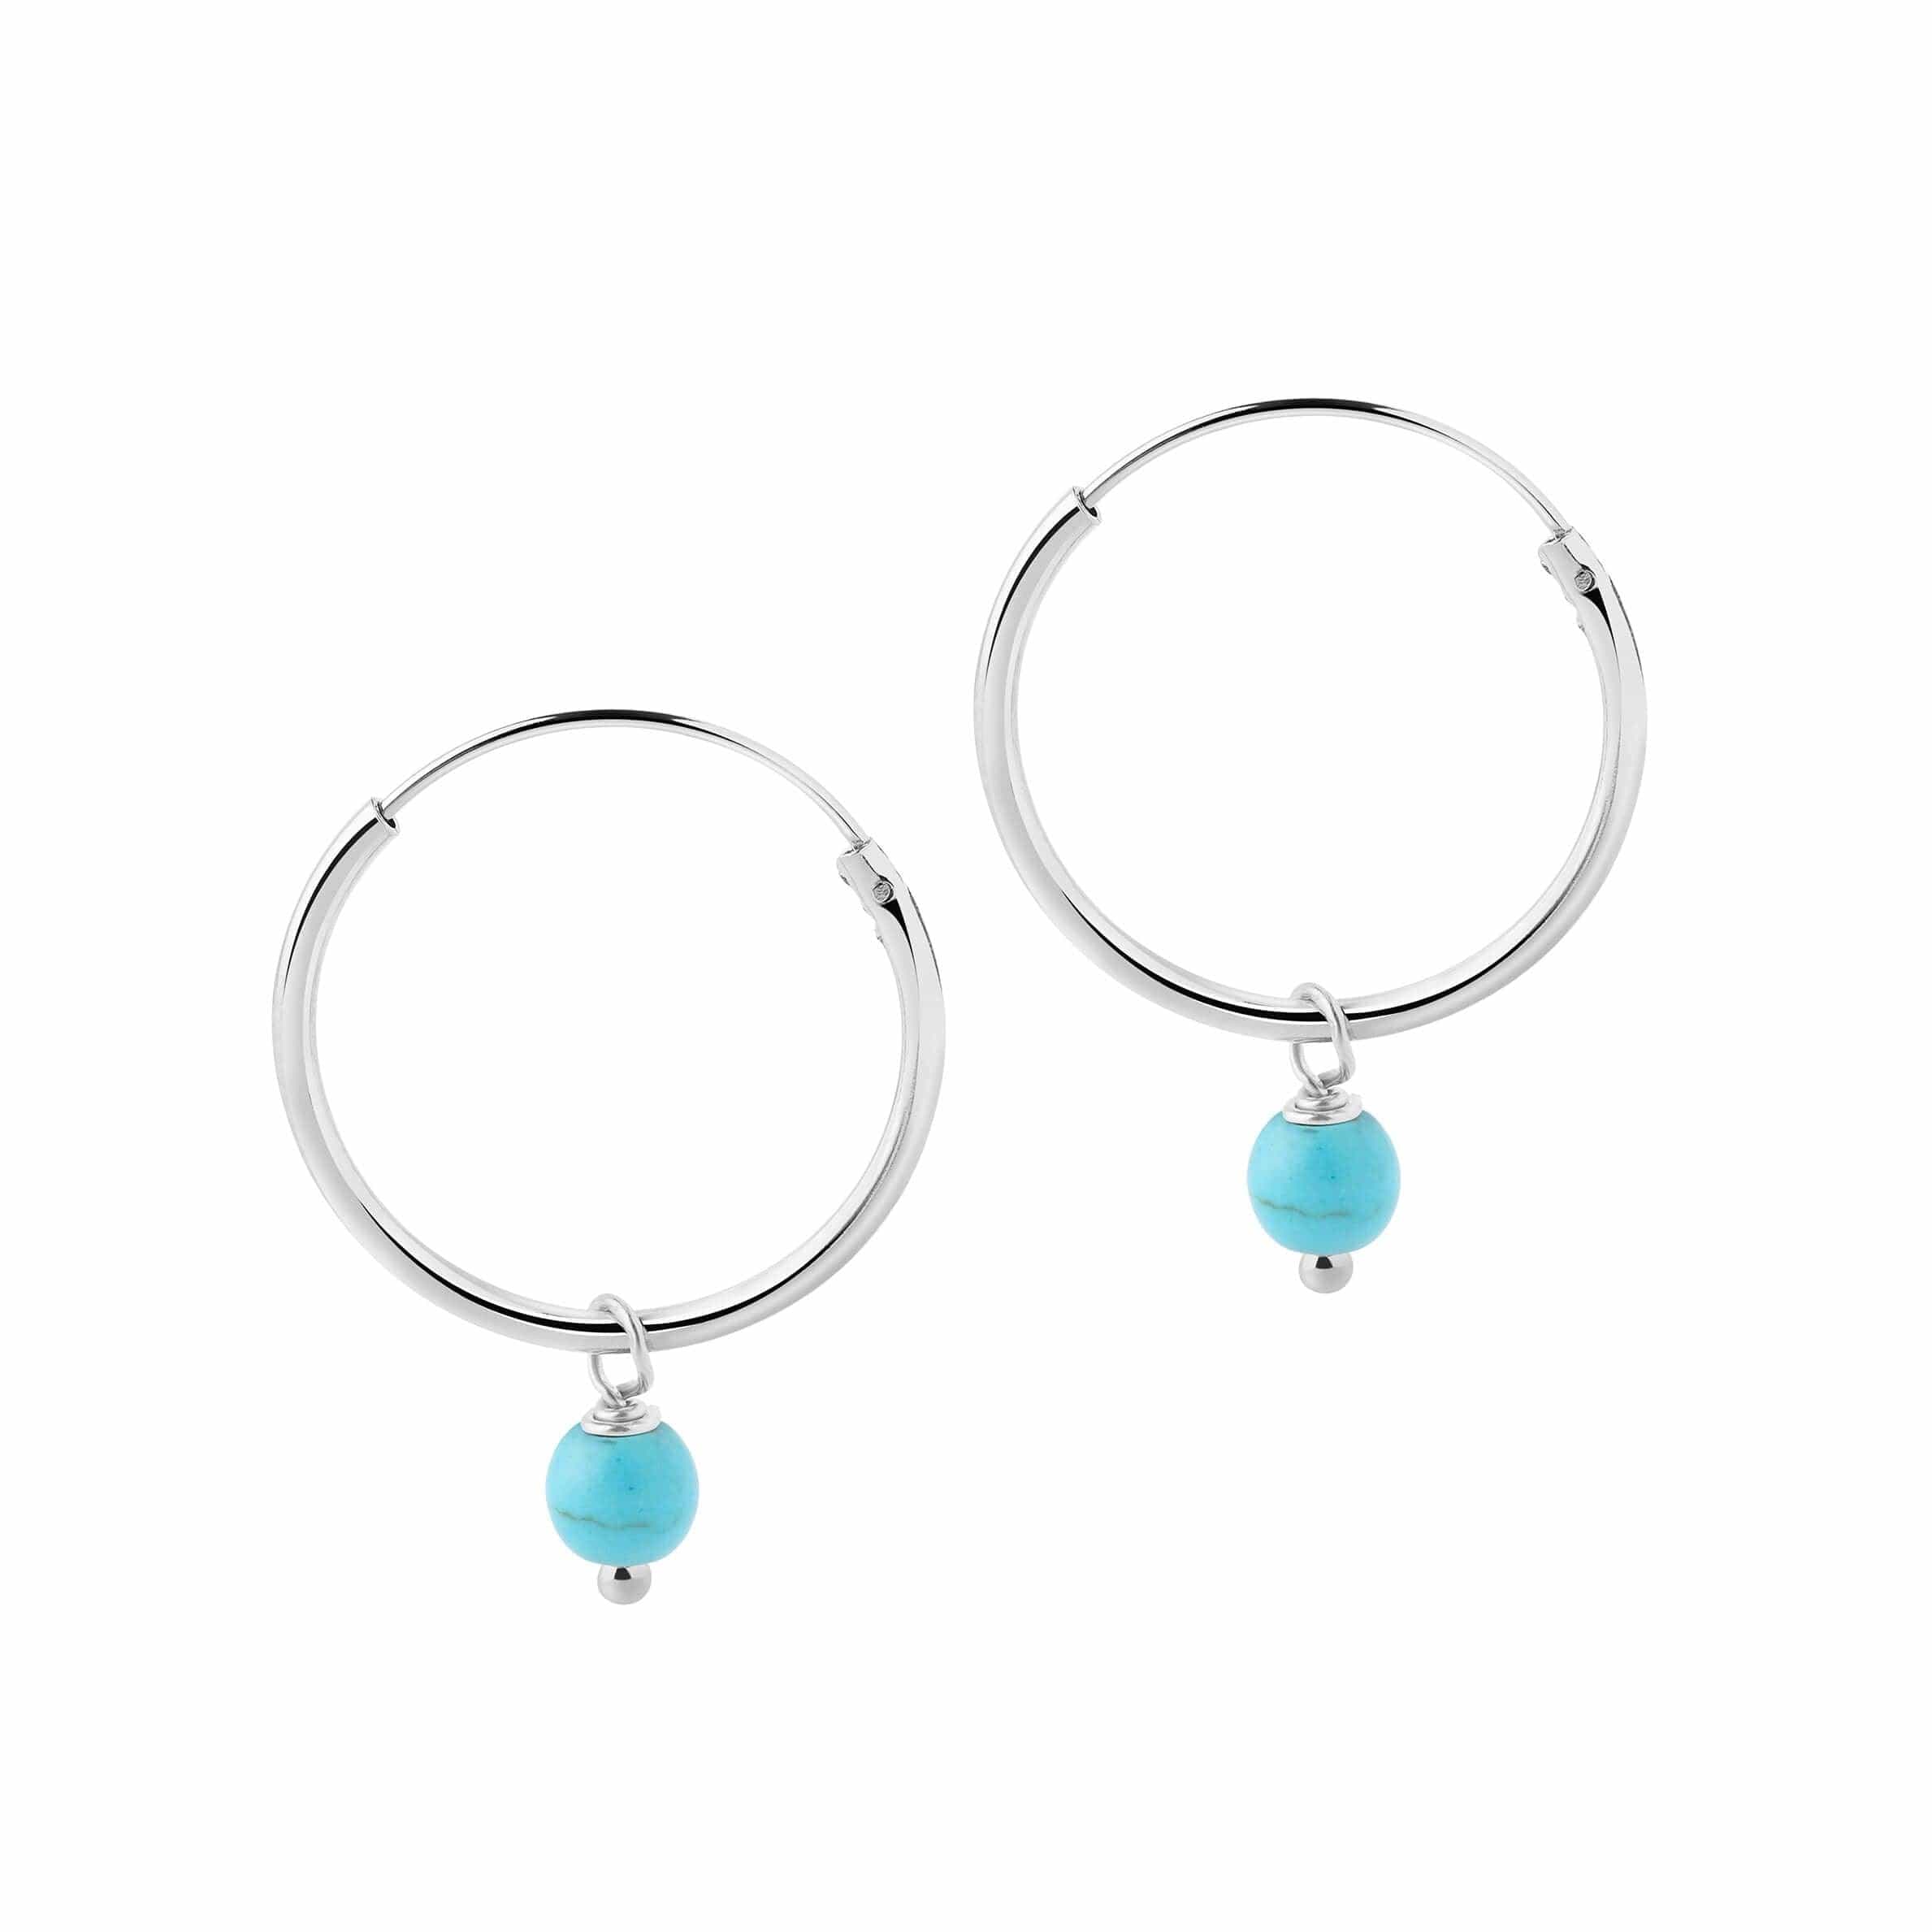 18mm silver Hoop Earrings with Turquoise Blue Stone